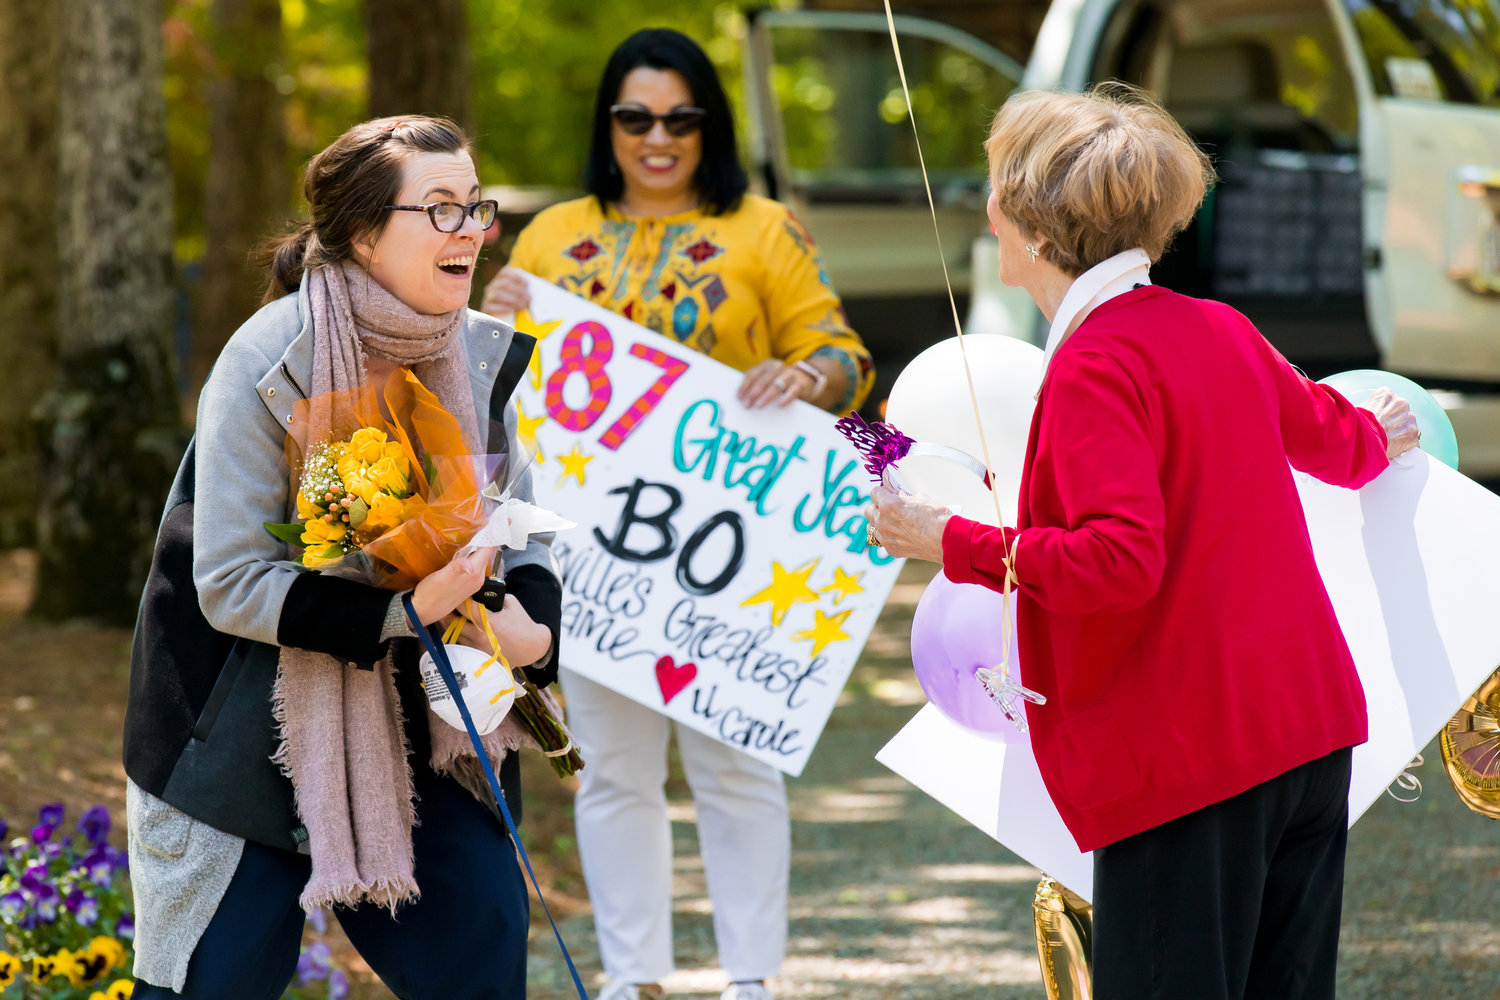 Mary Kate Burke, who succeeded Bo Thorp as artistic director of Cape Fear Regional Theatre, joins others in wishing Thorp a happy 87th birthday in April 2020.